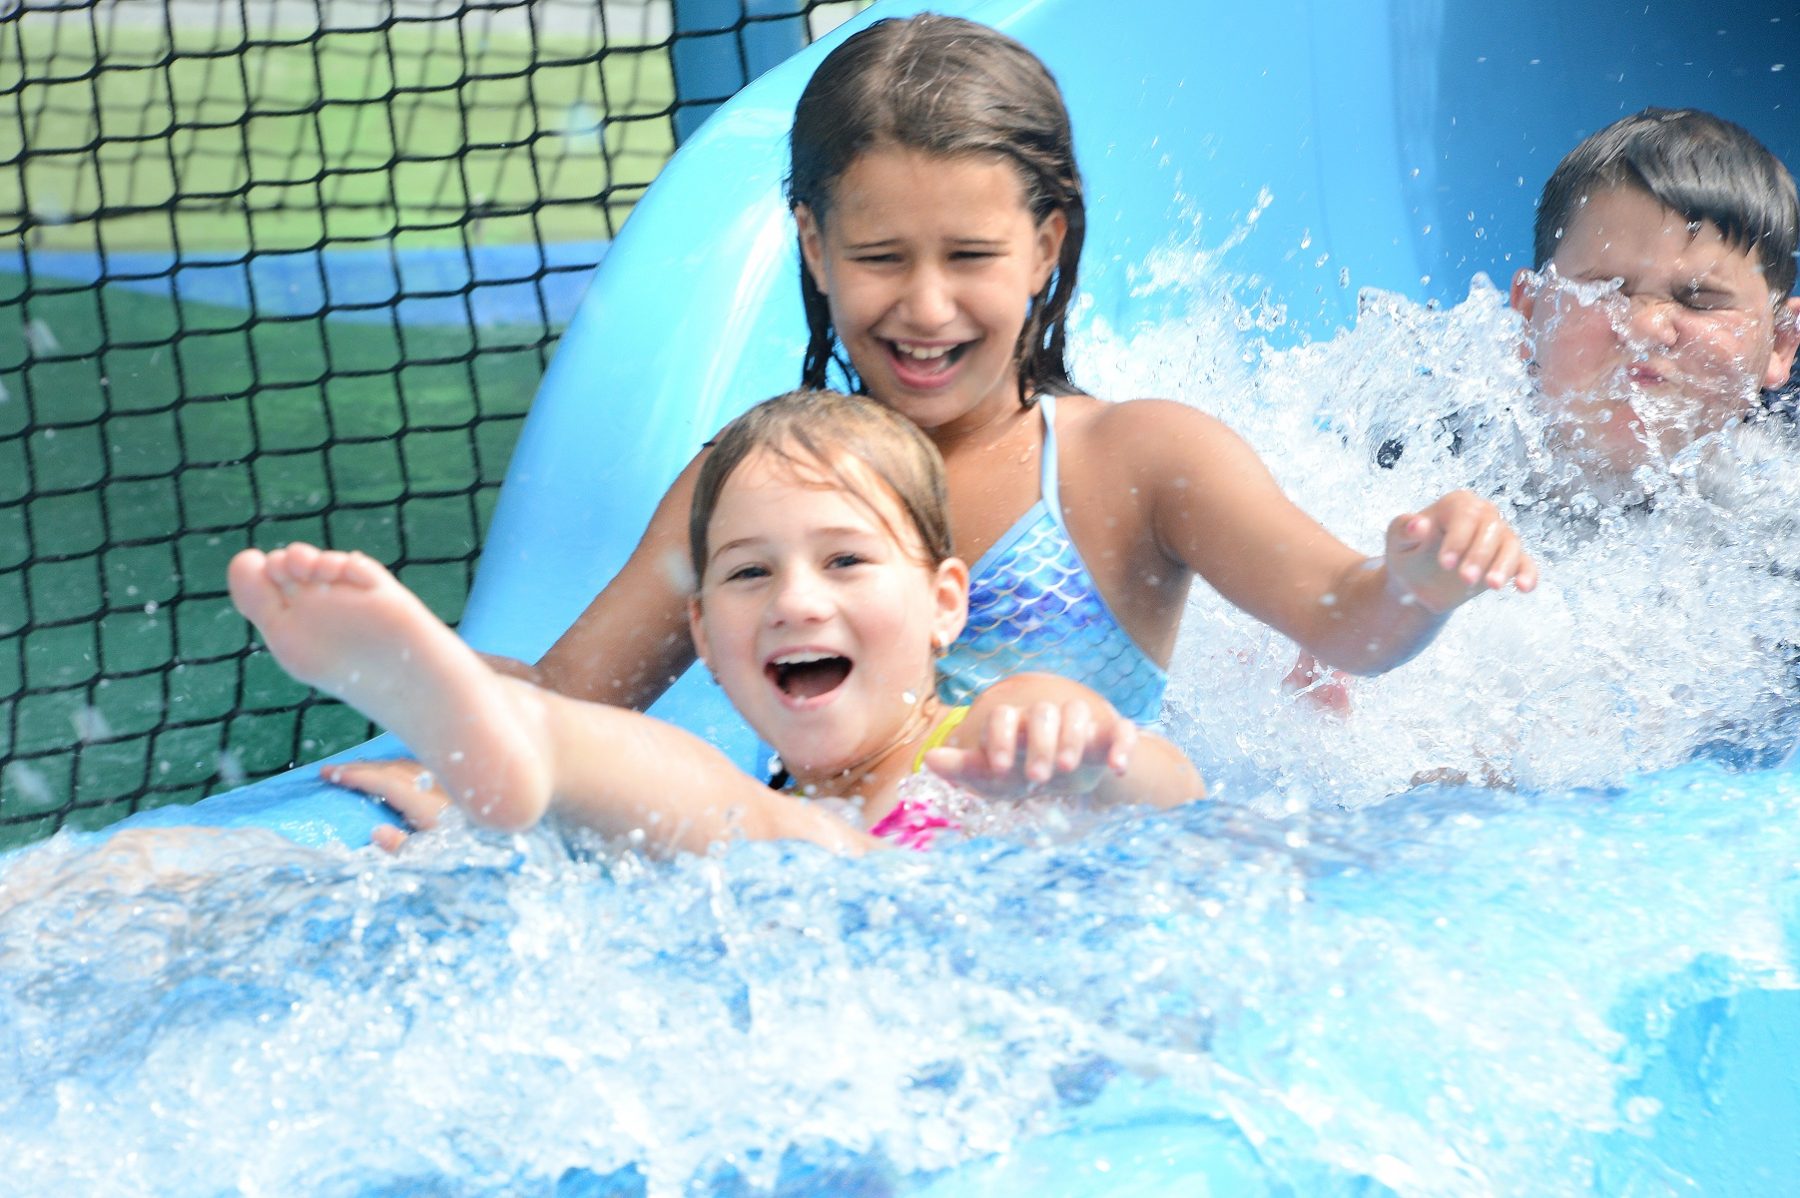 In the foreground of the photo two young girls are seen sliding down to the bottom of the slide laughing and smiling.  Behind them is a young boy being splashed by the girls in front of him.